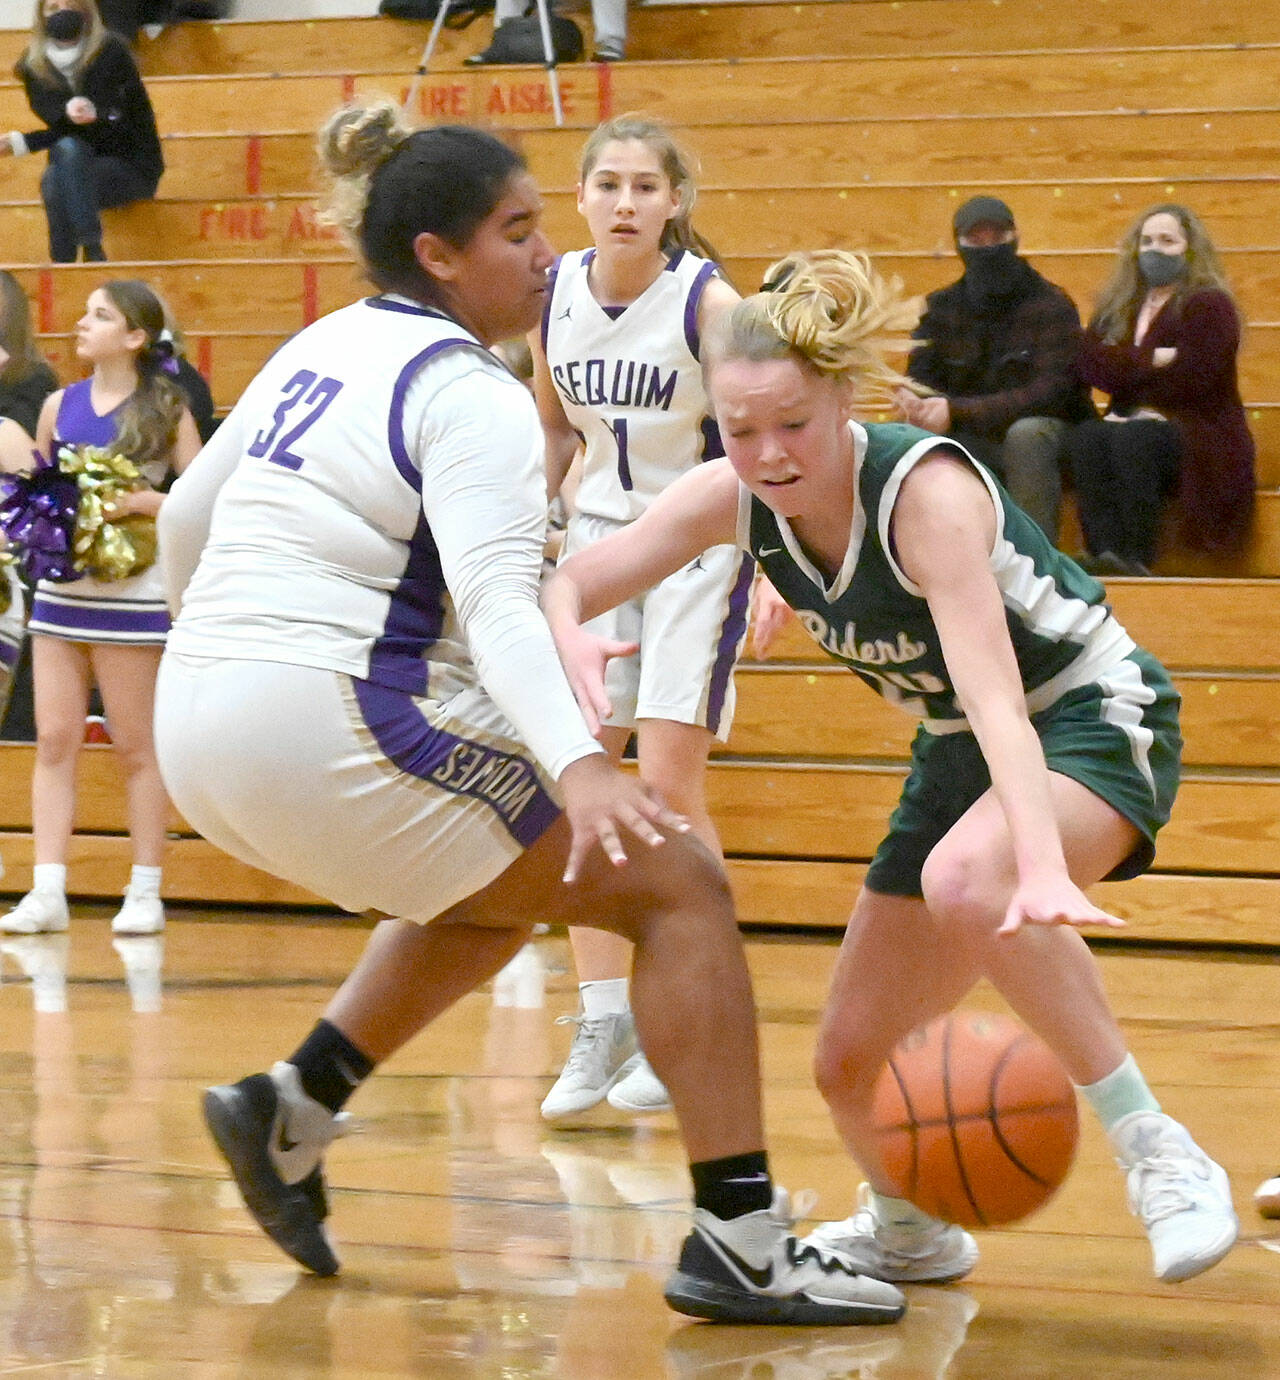 Michael Dashiell/Olympic Peninsula News Group Port Angeles’ Anna Petty dribbles inside while defended by Sequim’s Jelissa Julmist during the Wolves’ 60-55 victory Tuesday.